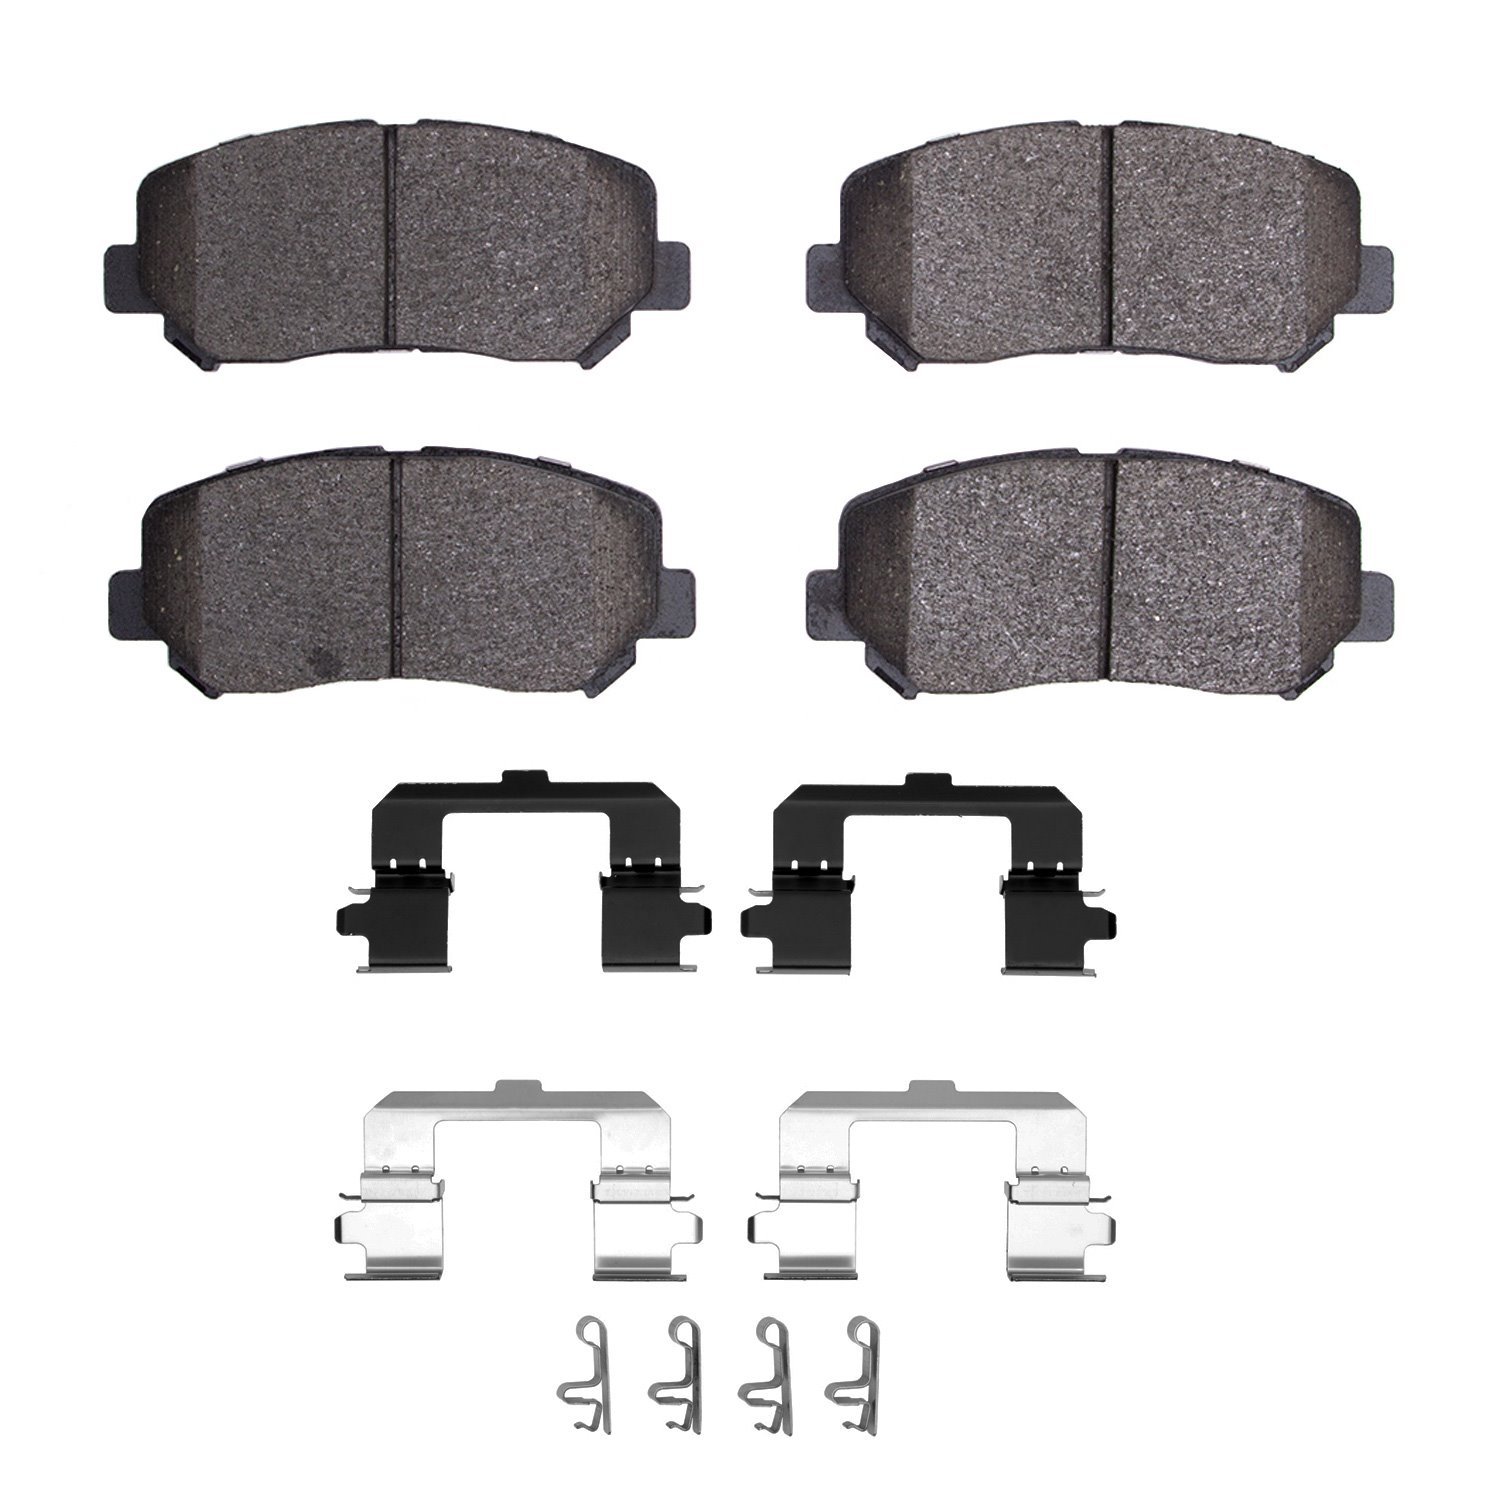 1551-1623-01 5000 Advanced Ceramic Brake Pads & Hardware Kit, Fits Select Ford/Lincoln/Mercury/Mazda, Position: Front